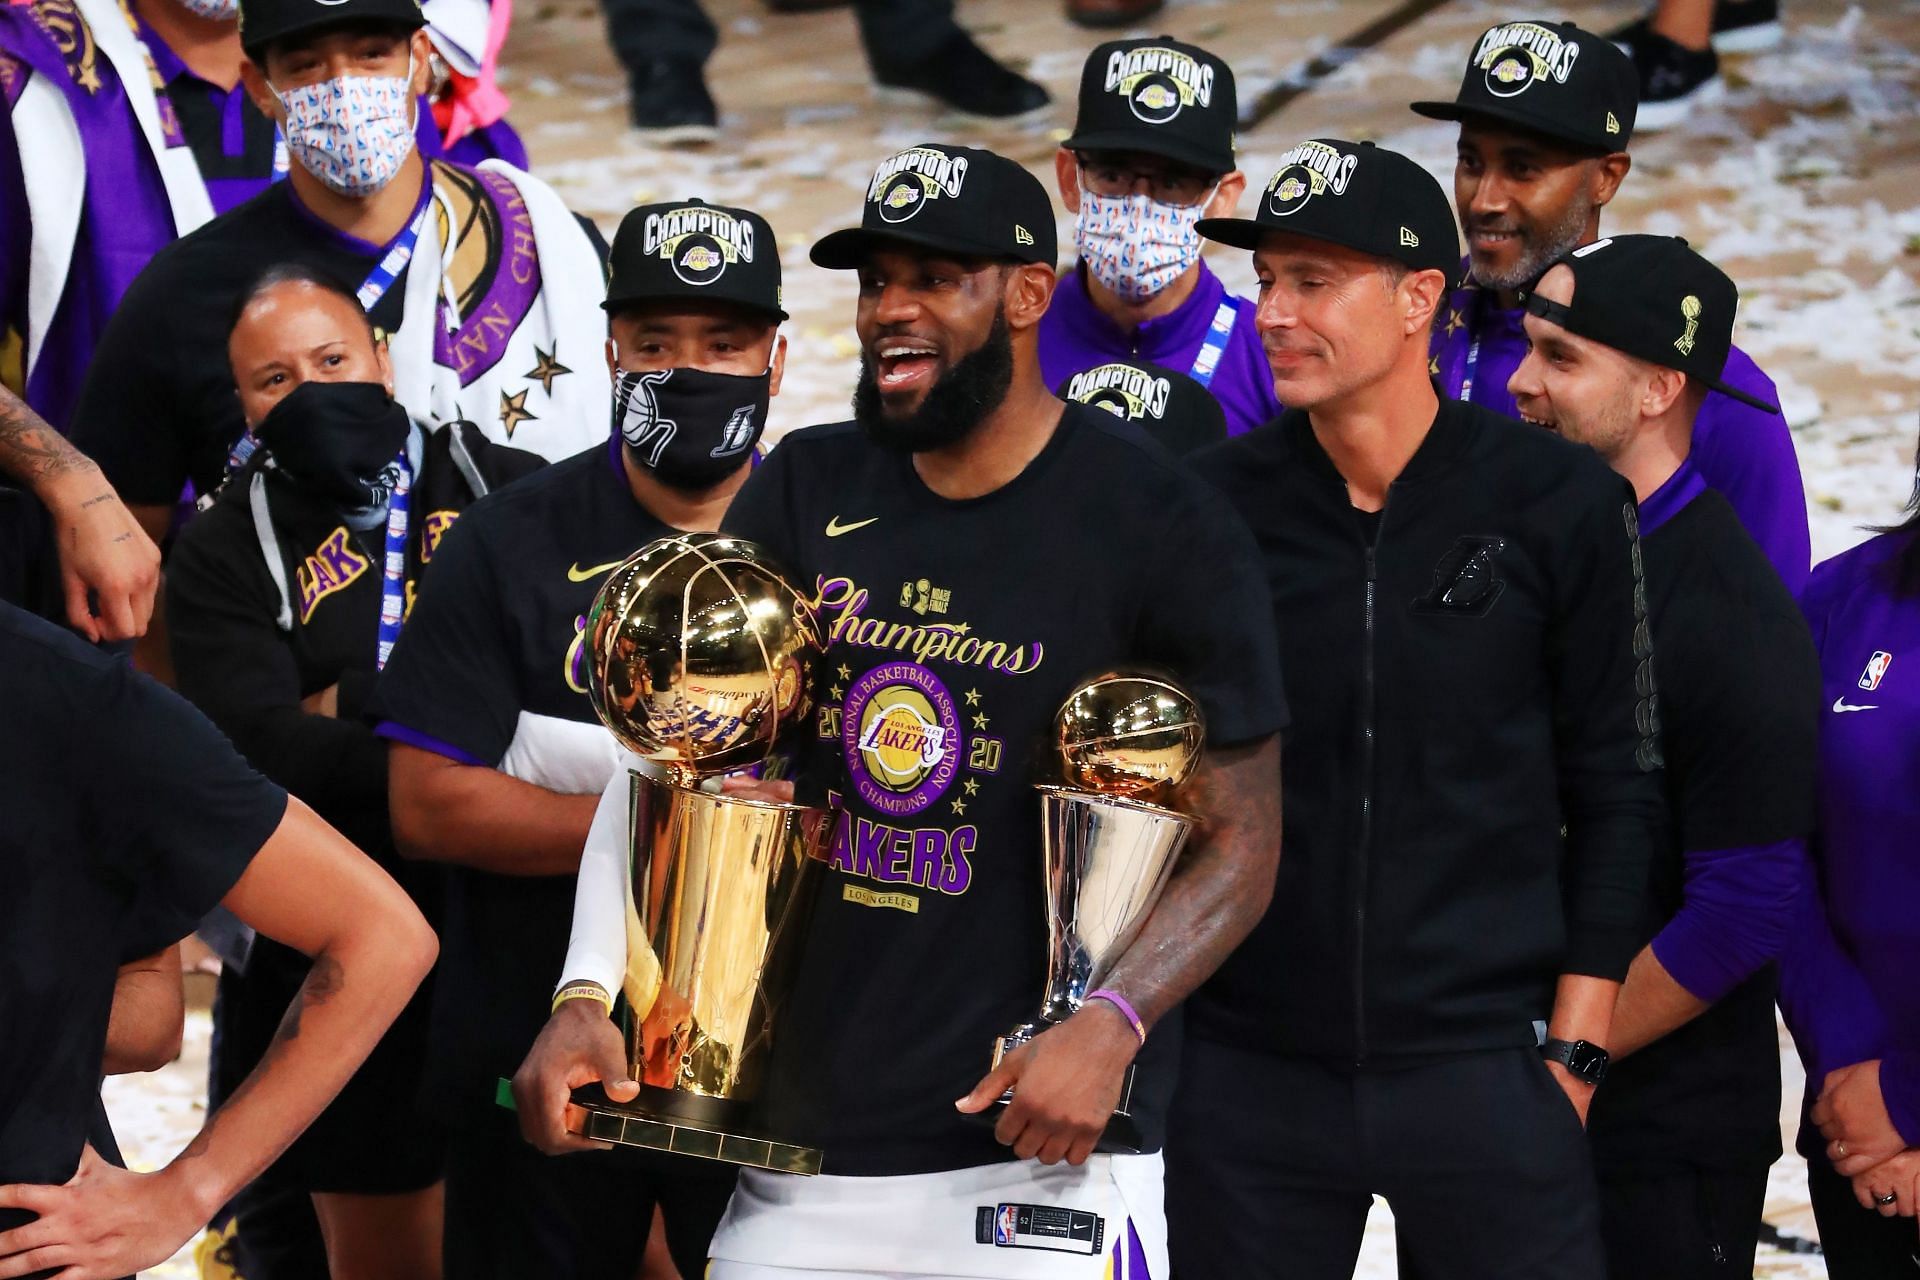 LeBron James could help the LA Lakers win a record 18th title in the upcoming NBA season